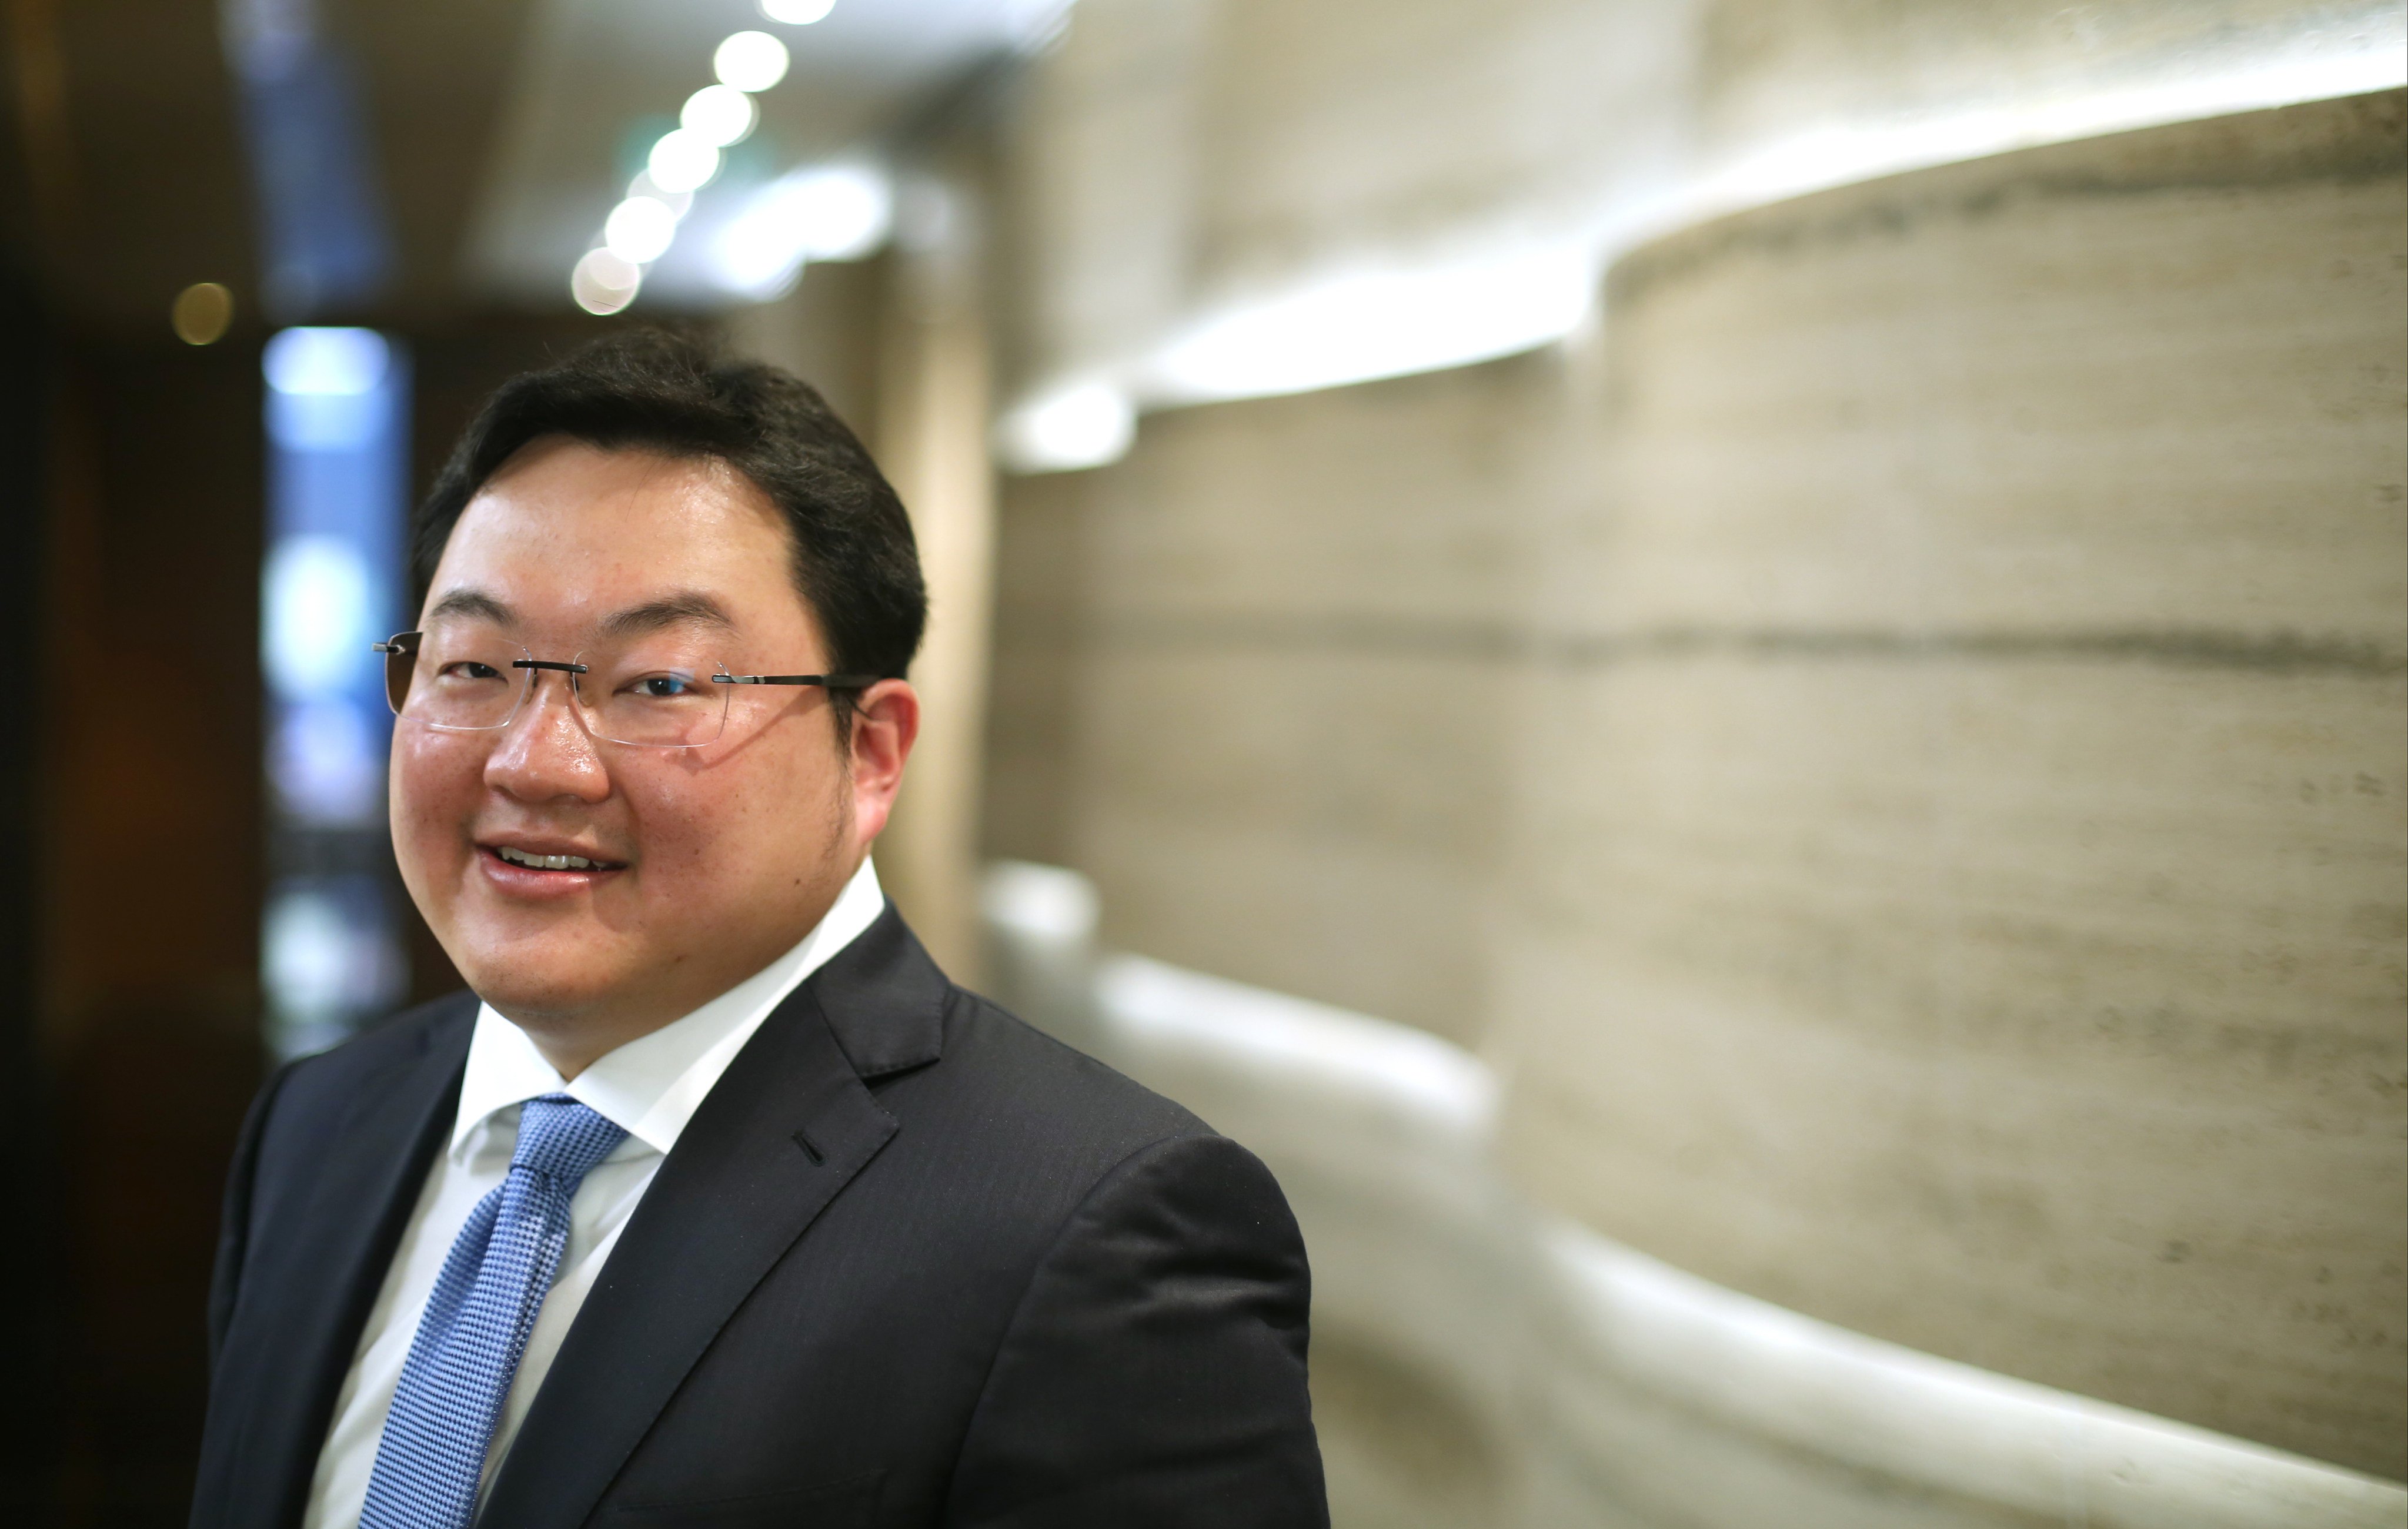 Jho Low paid US$8 million and promised as much as US$75 million more if the US Justice Department was successfully persuaded to walk away from its civil forfeiture case against 1MDB, the court heard. Photo: Sam Tsang